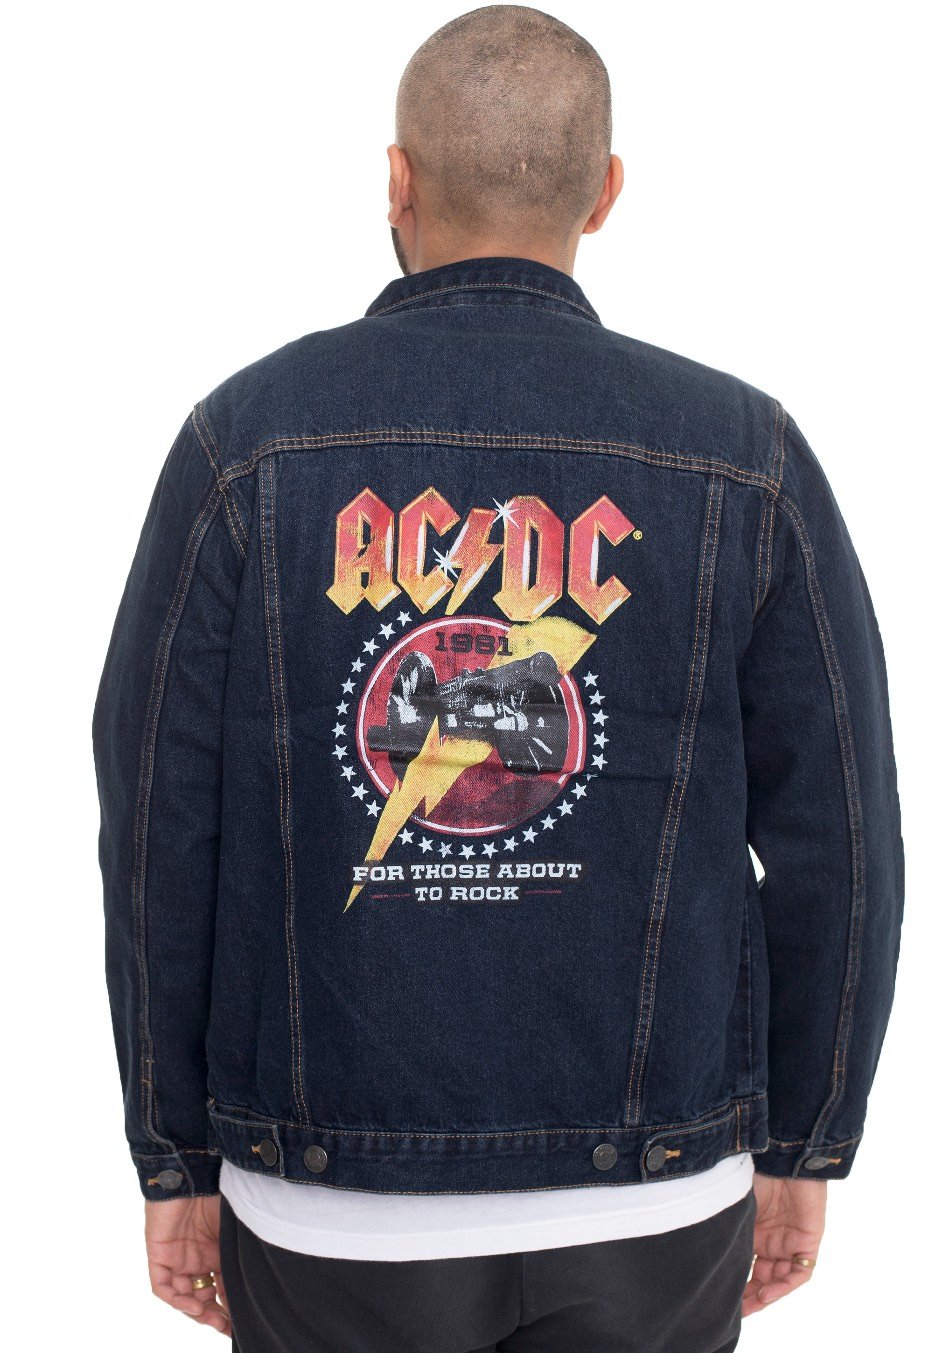 AC/DC - About To Rock - Jeans Jacket